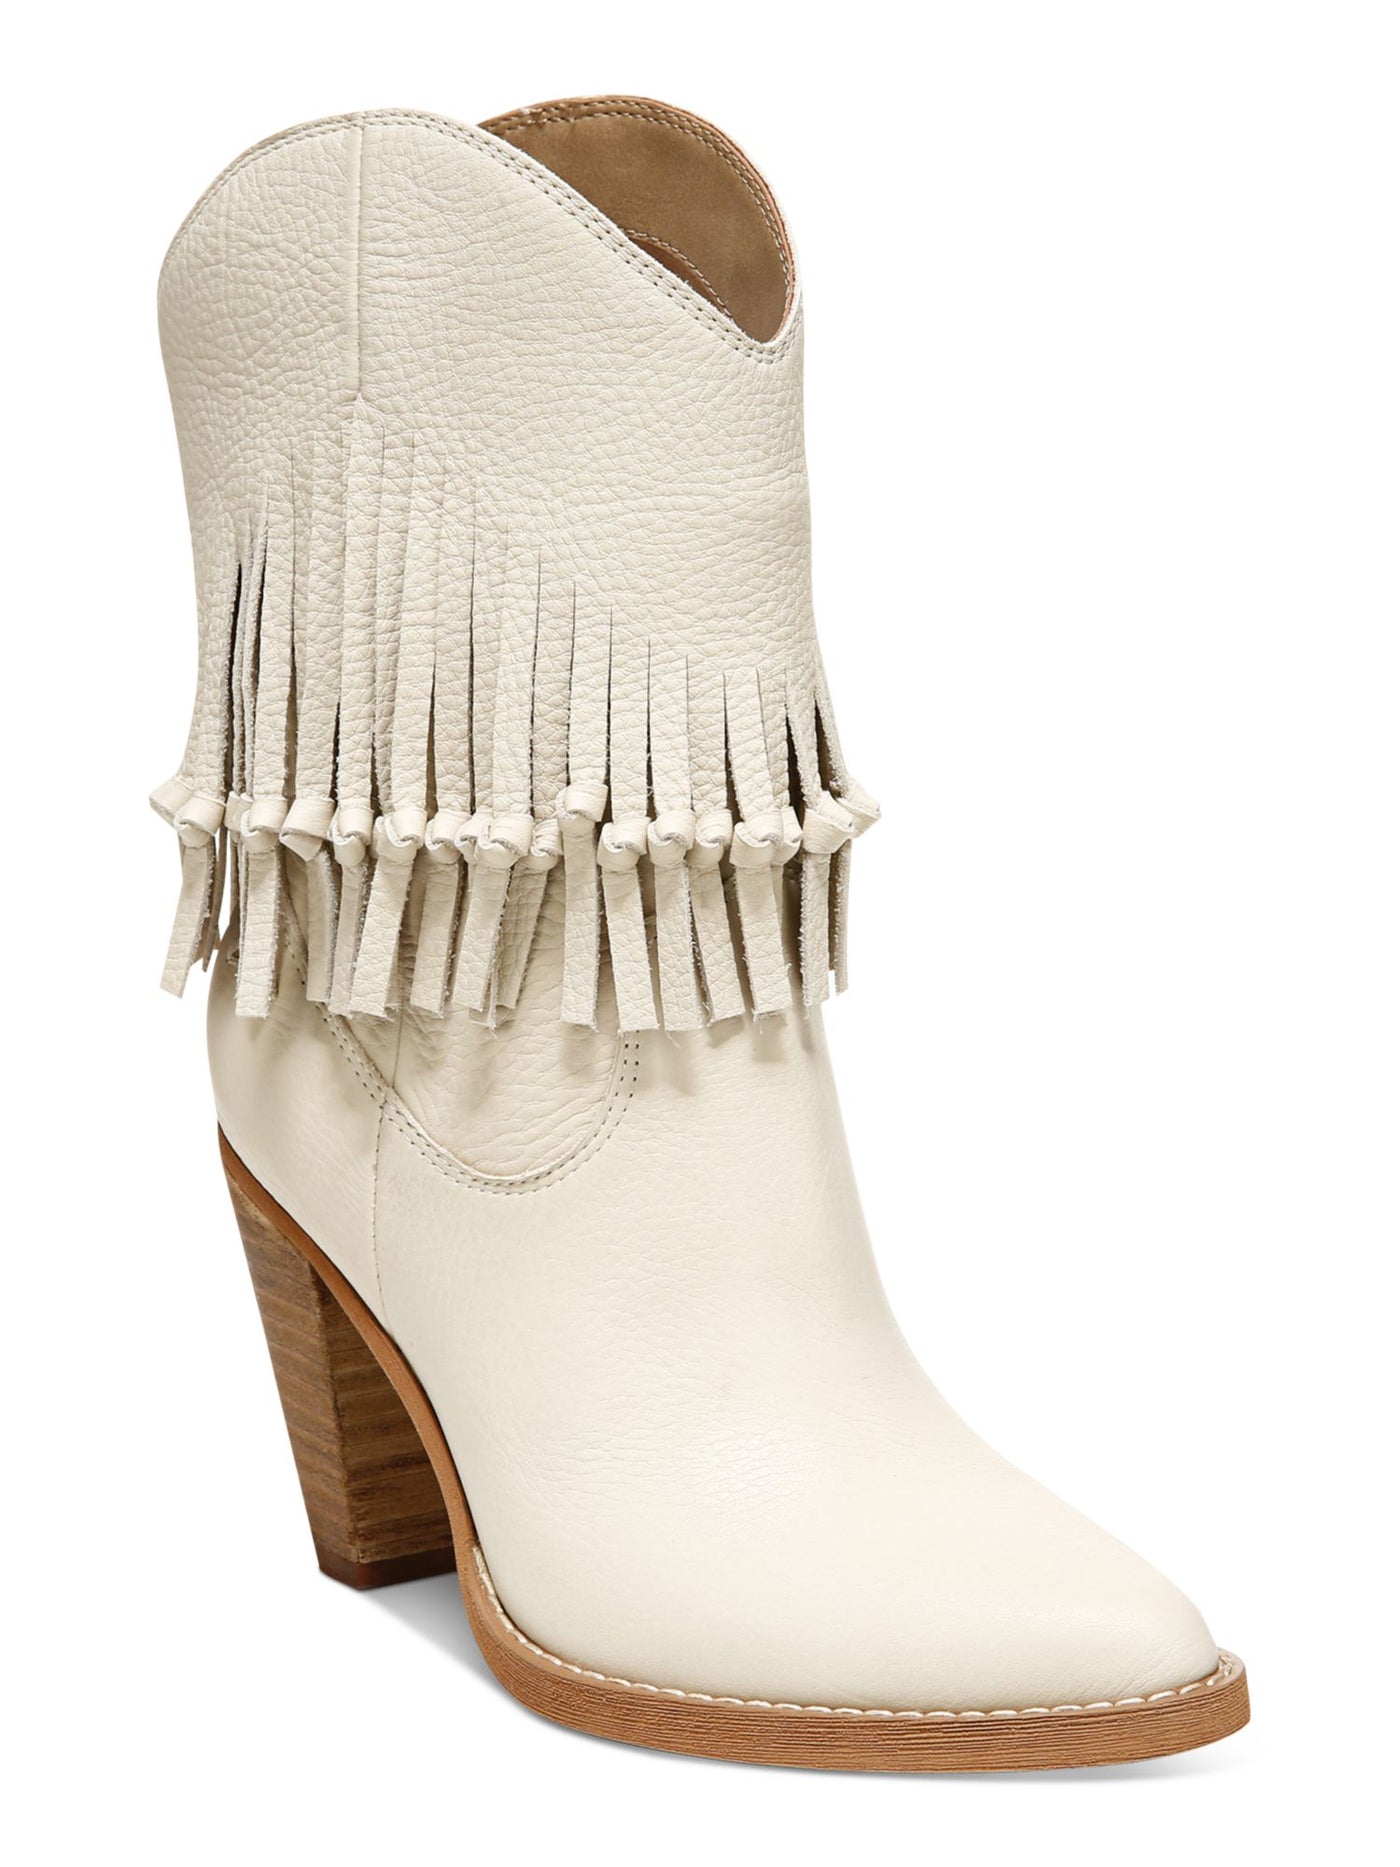 ZODIAC Womens Beige Fringed Padded Donna Pointed Toe Stacked Heel Zip-Up Leather Dress Cowboy Boots 9 M